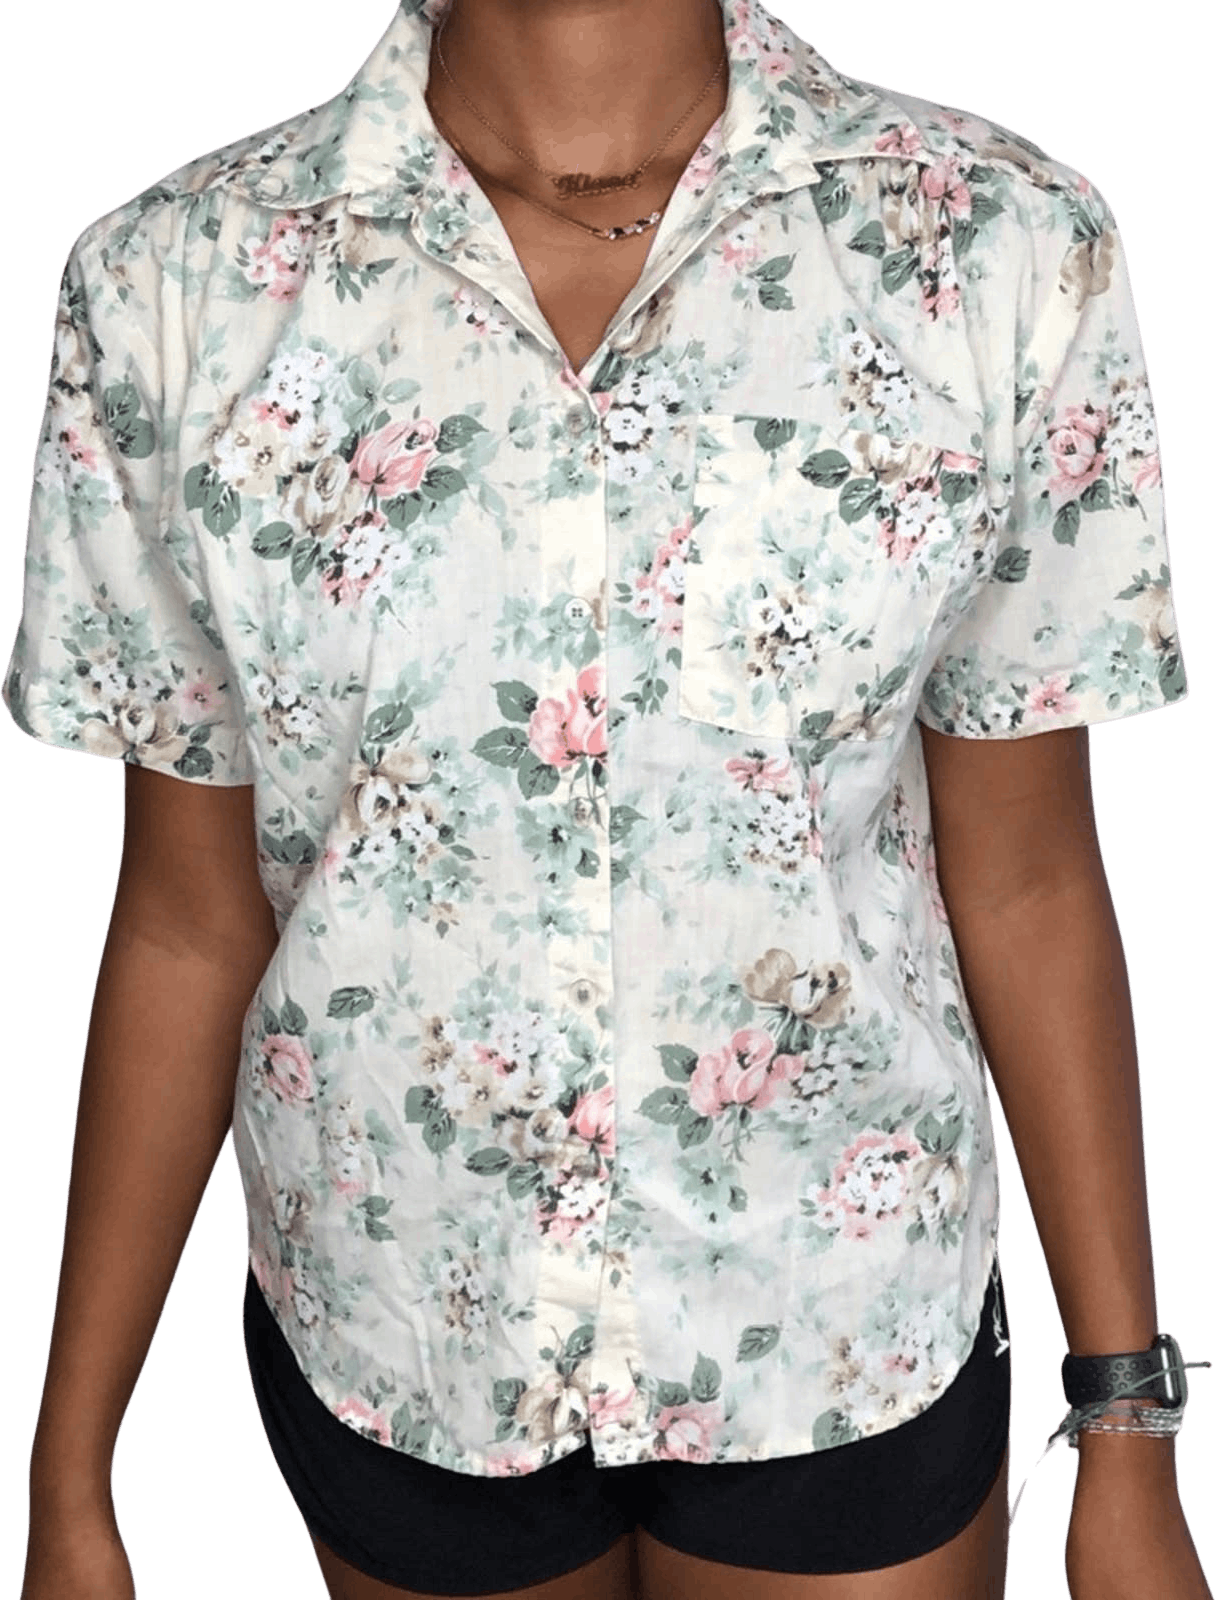 Vintage 70’s Floral Button Down Shirt by Tapestry | Shop THRILLING